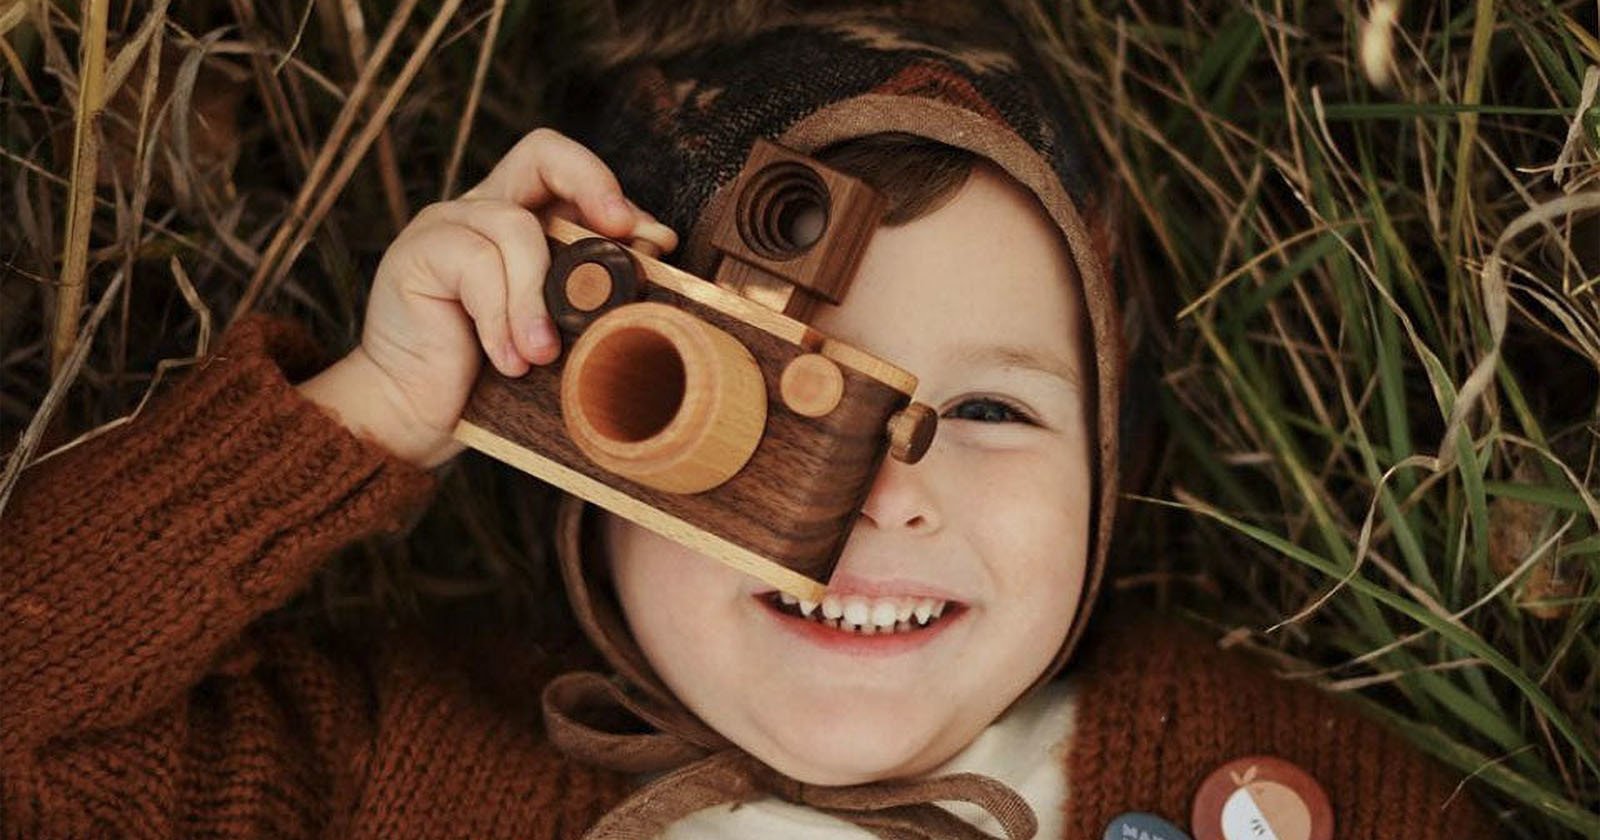  father factory makes heirloom-quality wooden toy cameras 